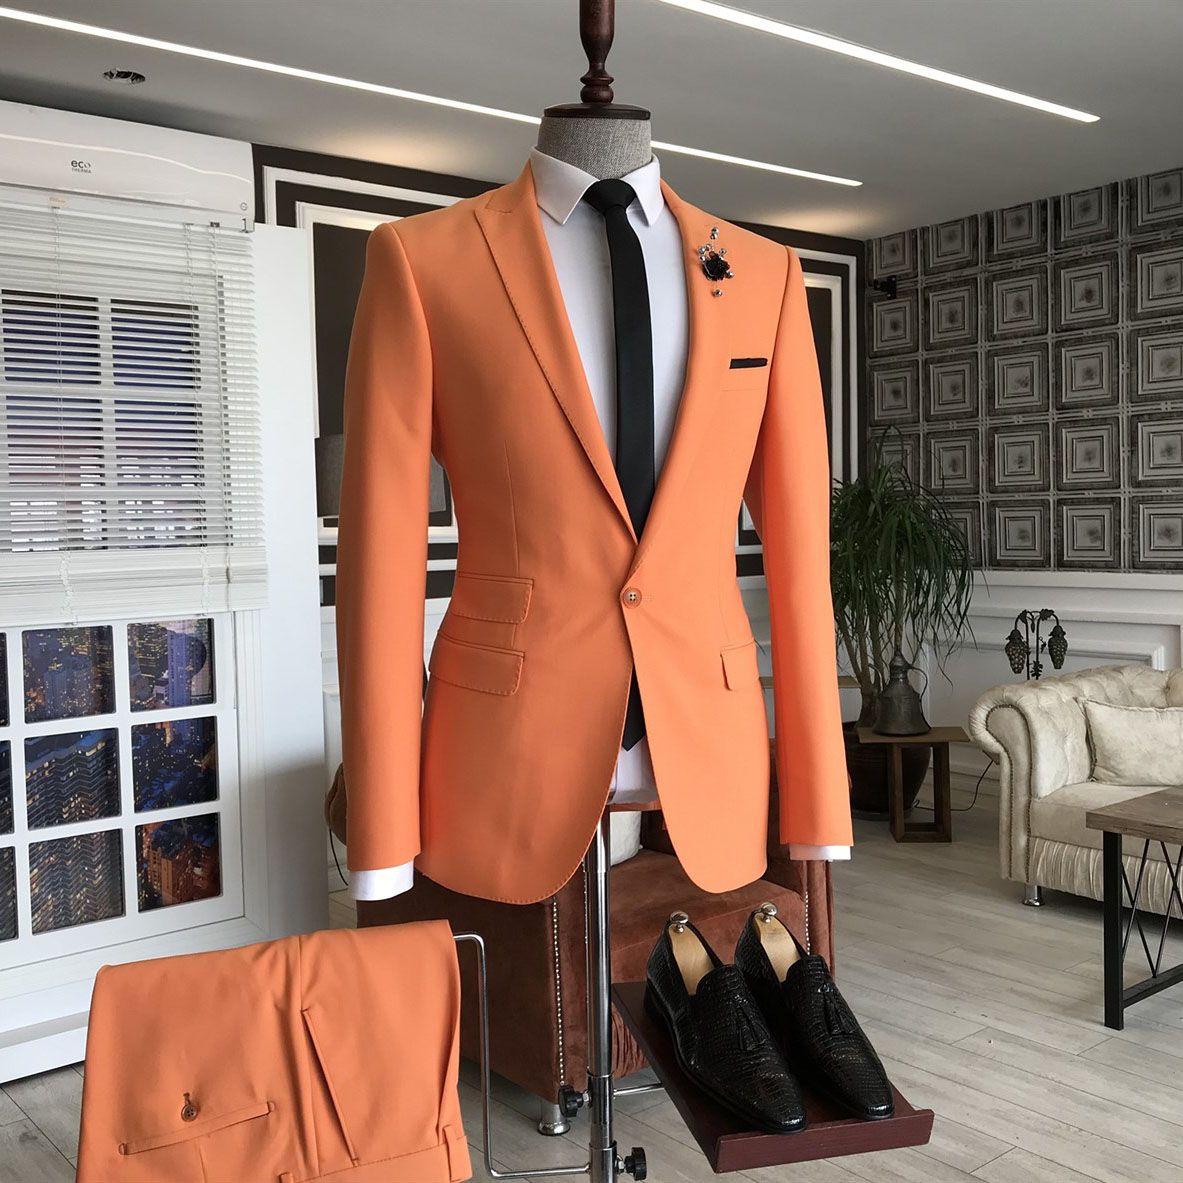 Look Sharp in this Shining Orange Homecoming Suit for Guys with Peaked Lapel